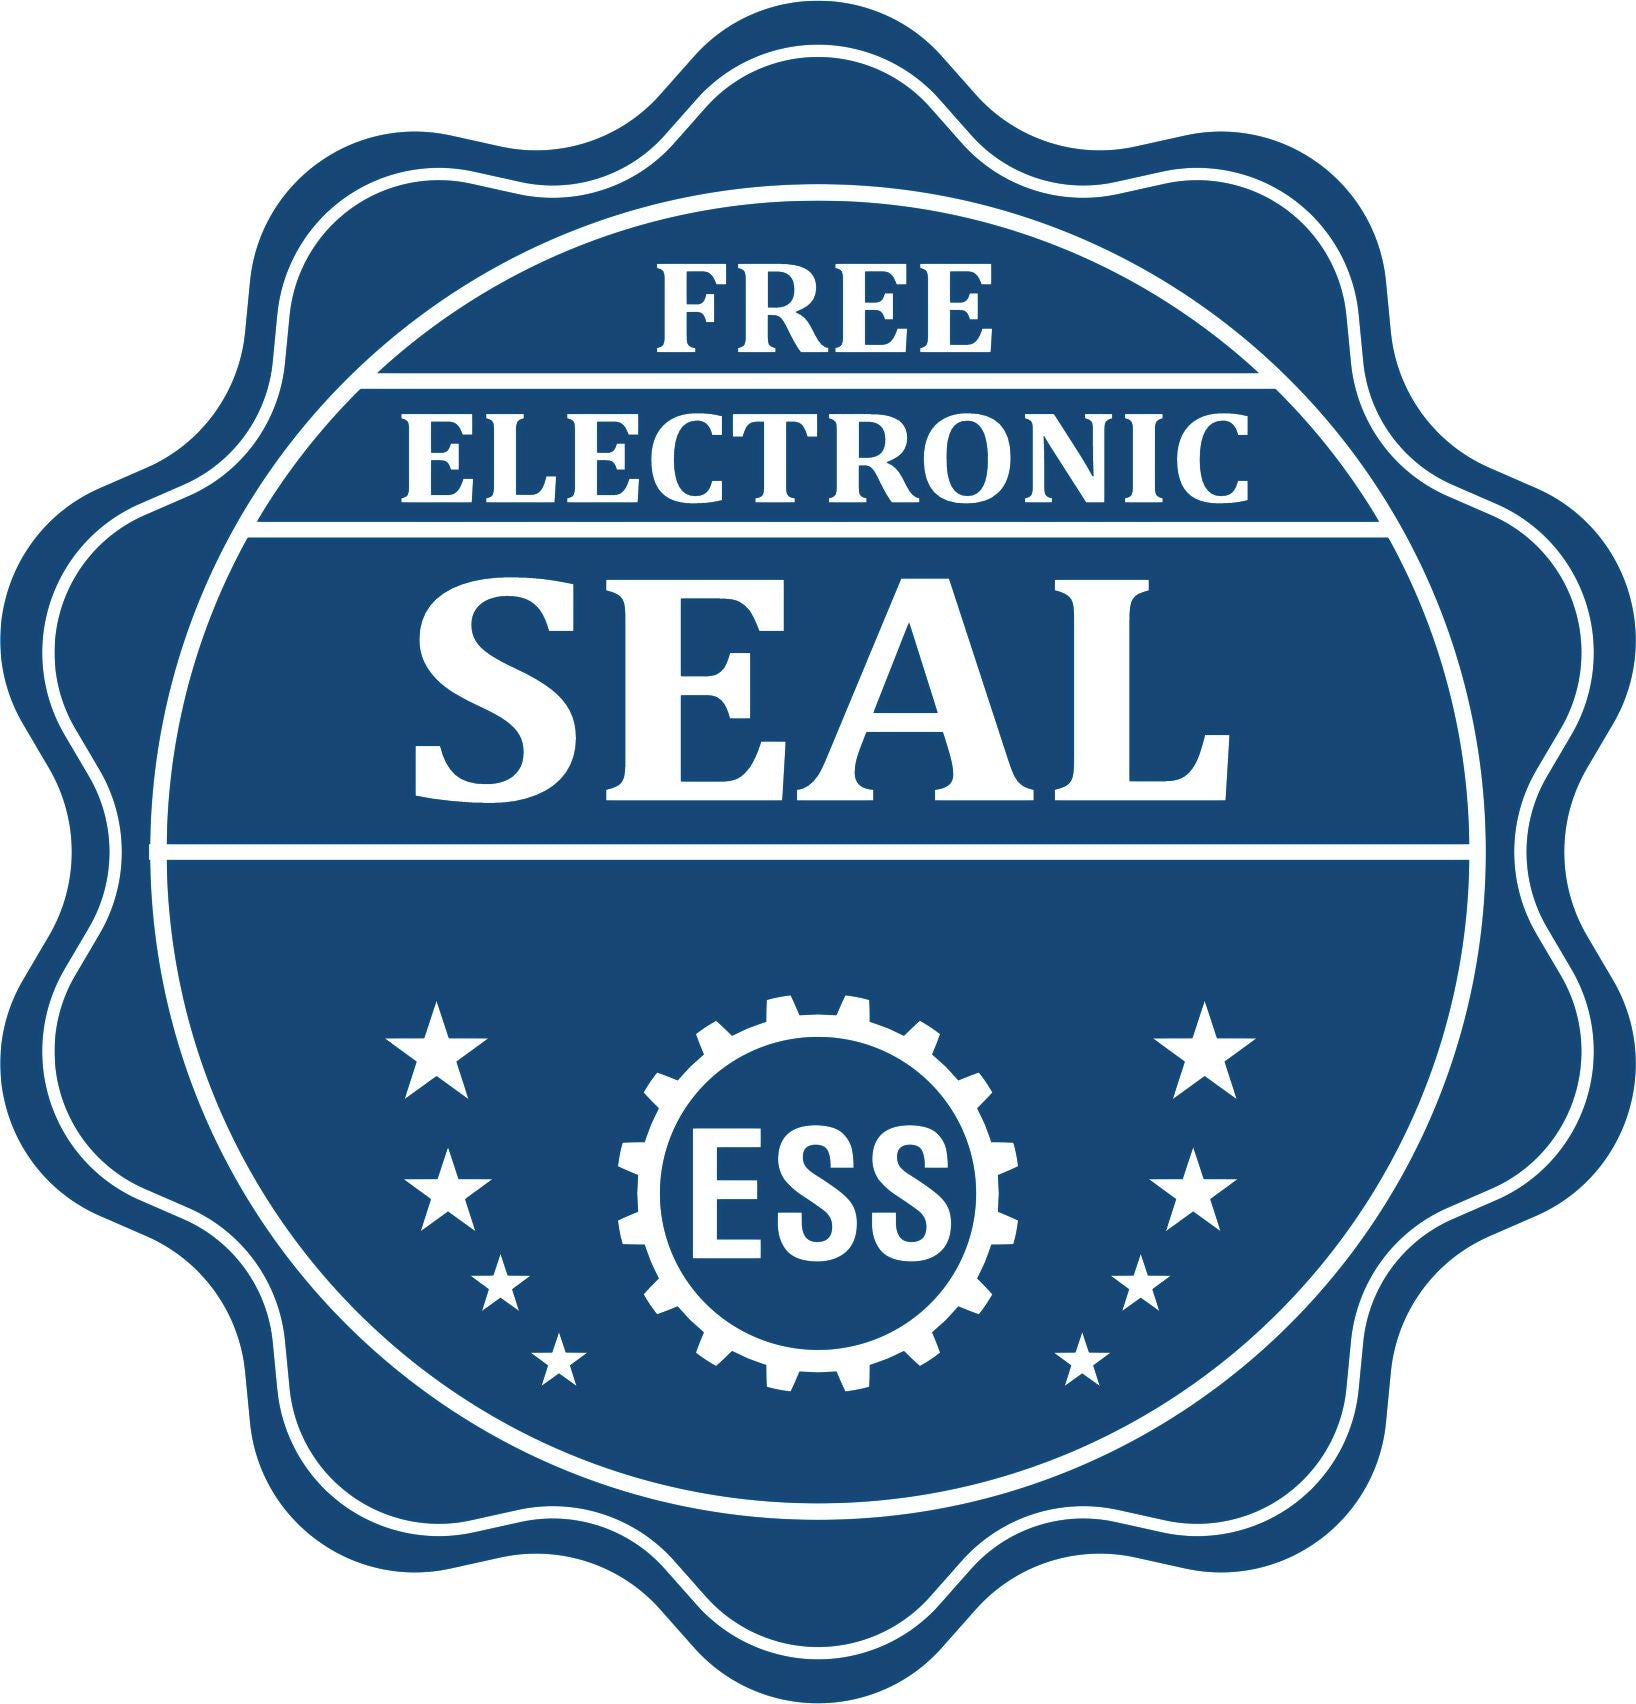 A badge showing a free electronic seal for the Handheld Tennessee Professional Geologist Embosser with stars and the ESS gear on the emblem.